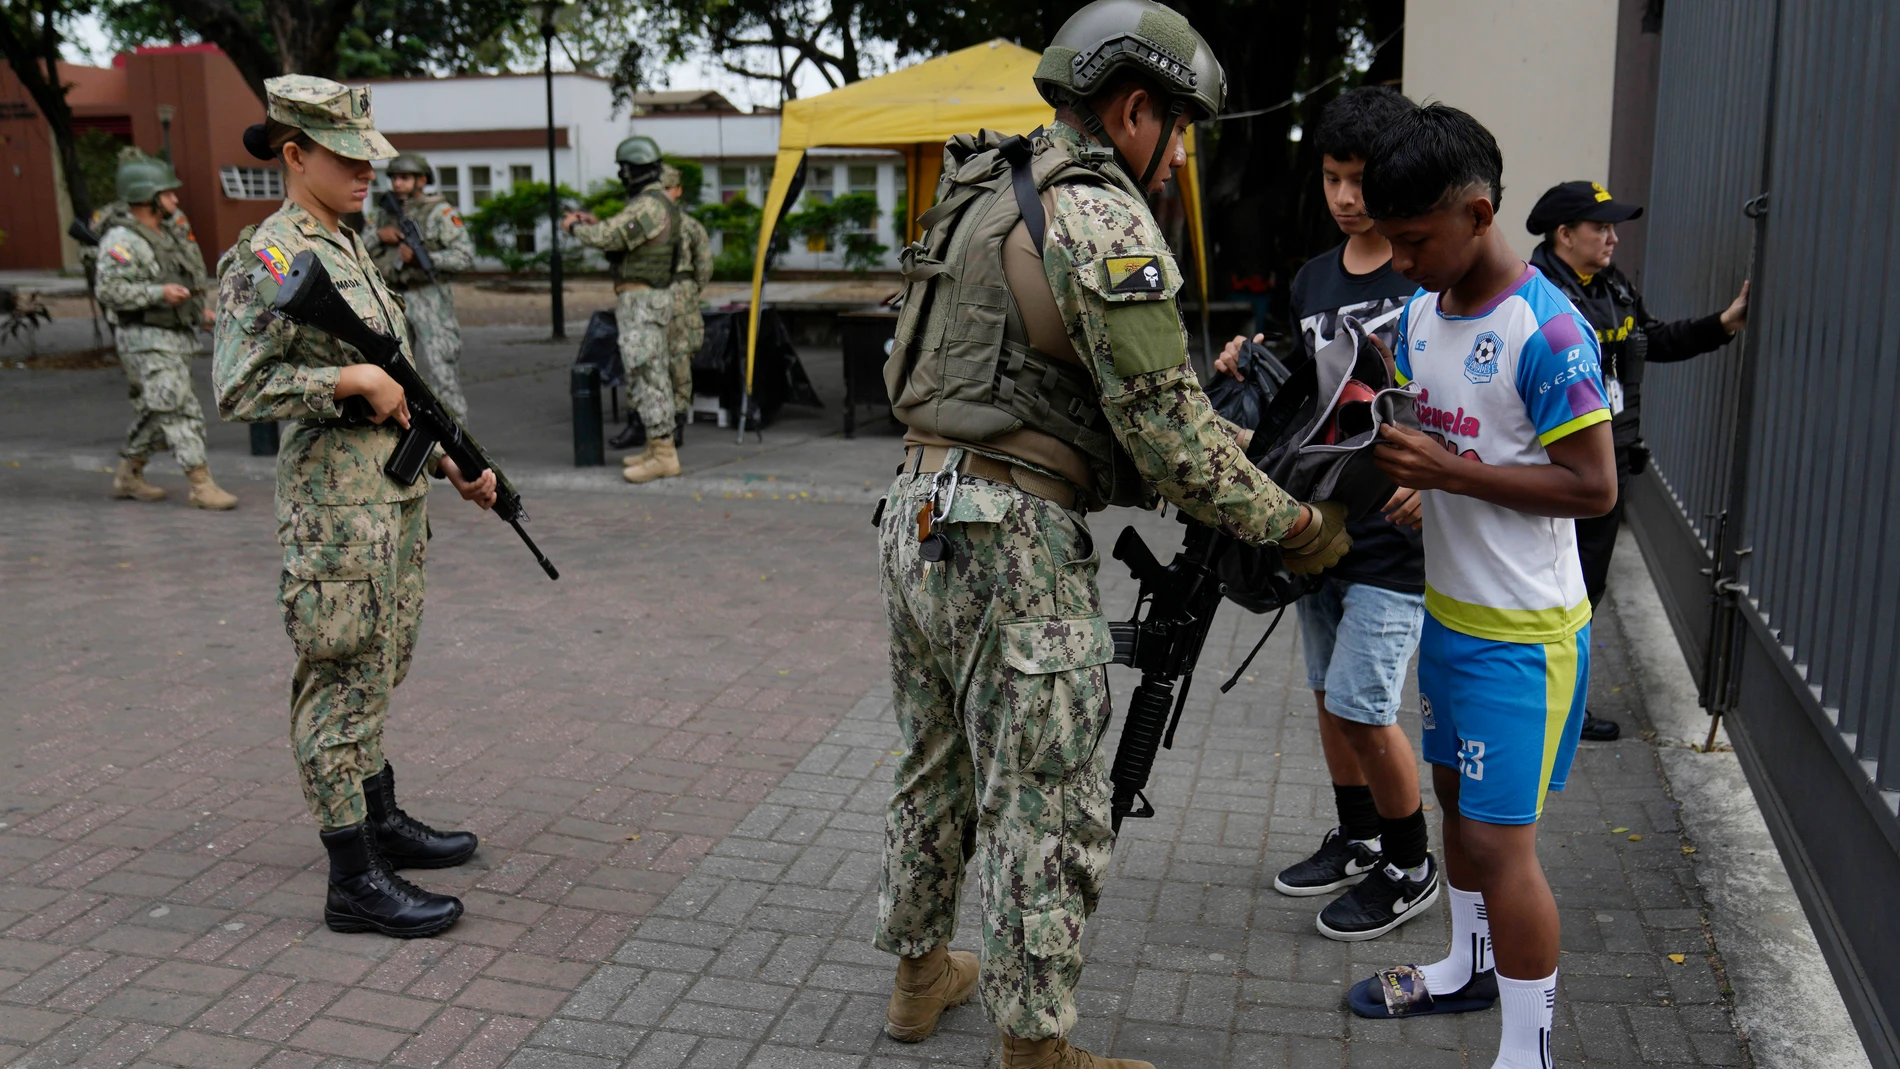 Soldiers search the backpacks of students on school grounds in downtown Guayaquil, Ecuador, Friday, Aug. 18, 2023. Ecuadorians will choose a new president Sunday, less than two weeks after the South American country was shaken by the assassination of one of the candidates(AP Photo/Martin Mejia)